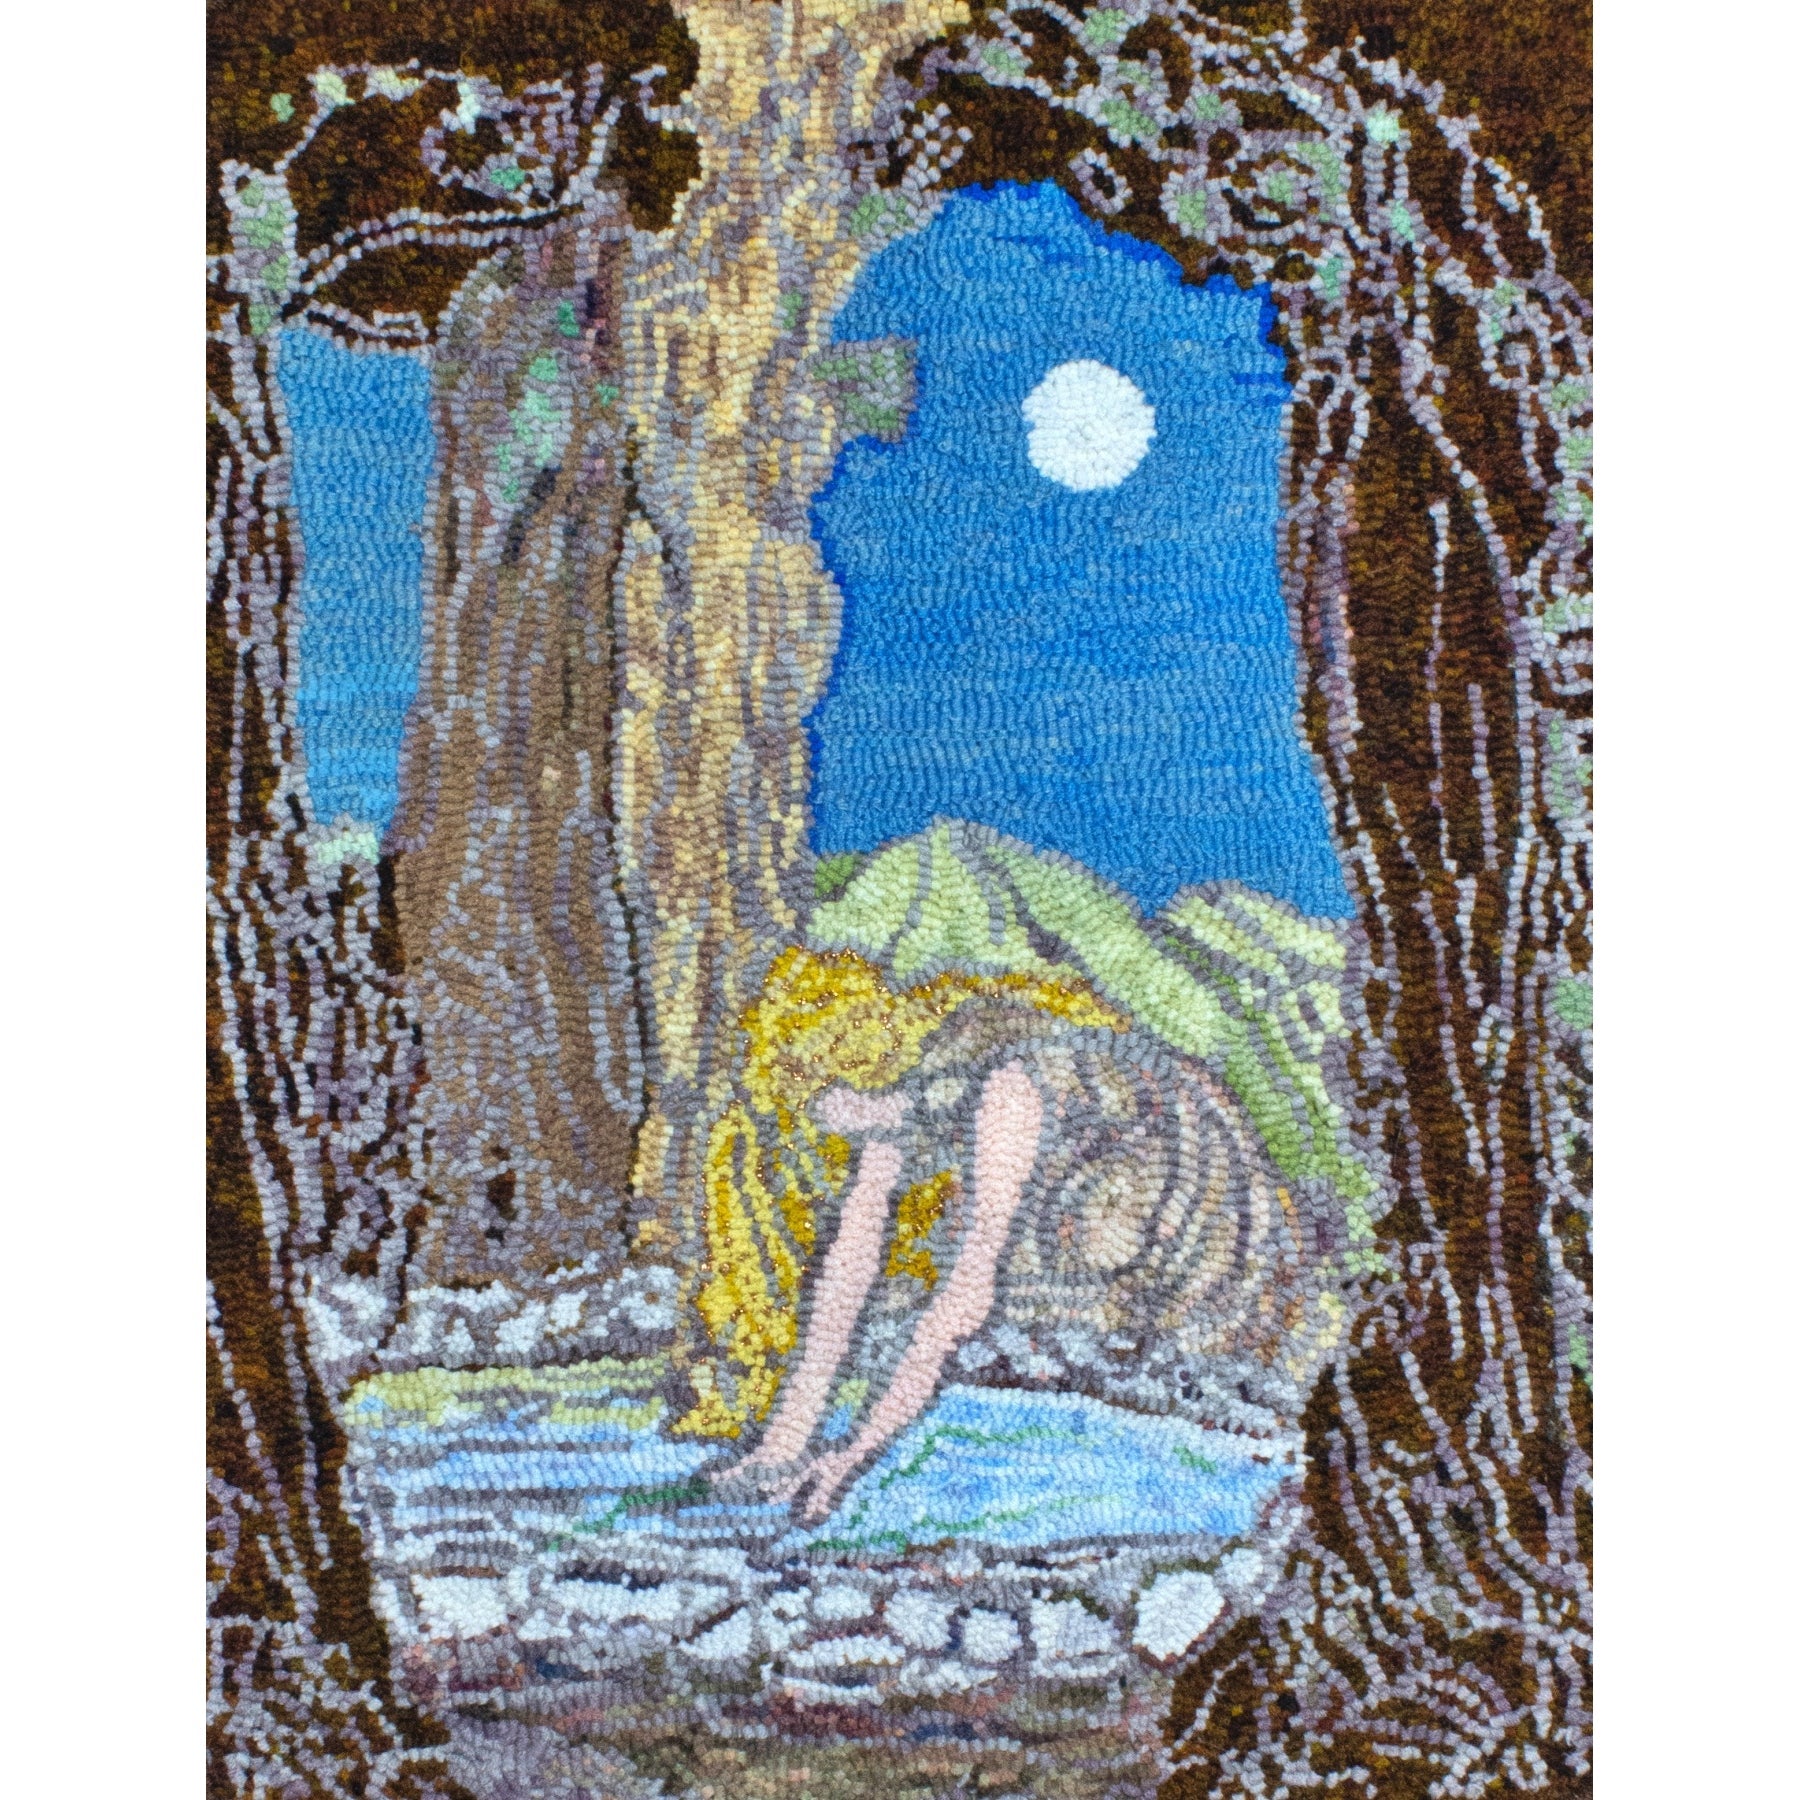 The Goose Girl at the Well, ill. Rie Cramer, 1927, rug hooked by Janet Williams